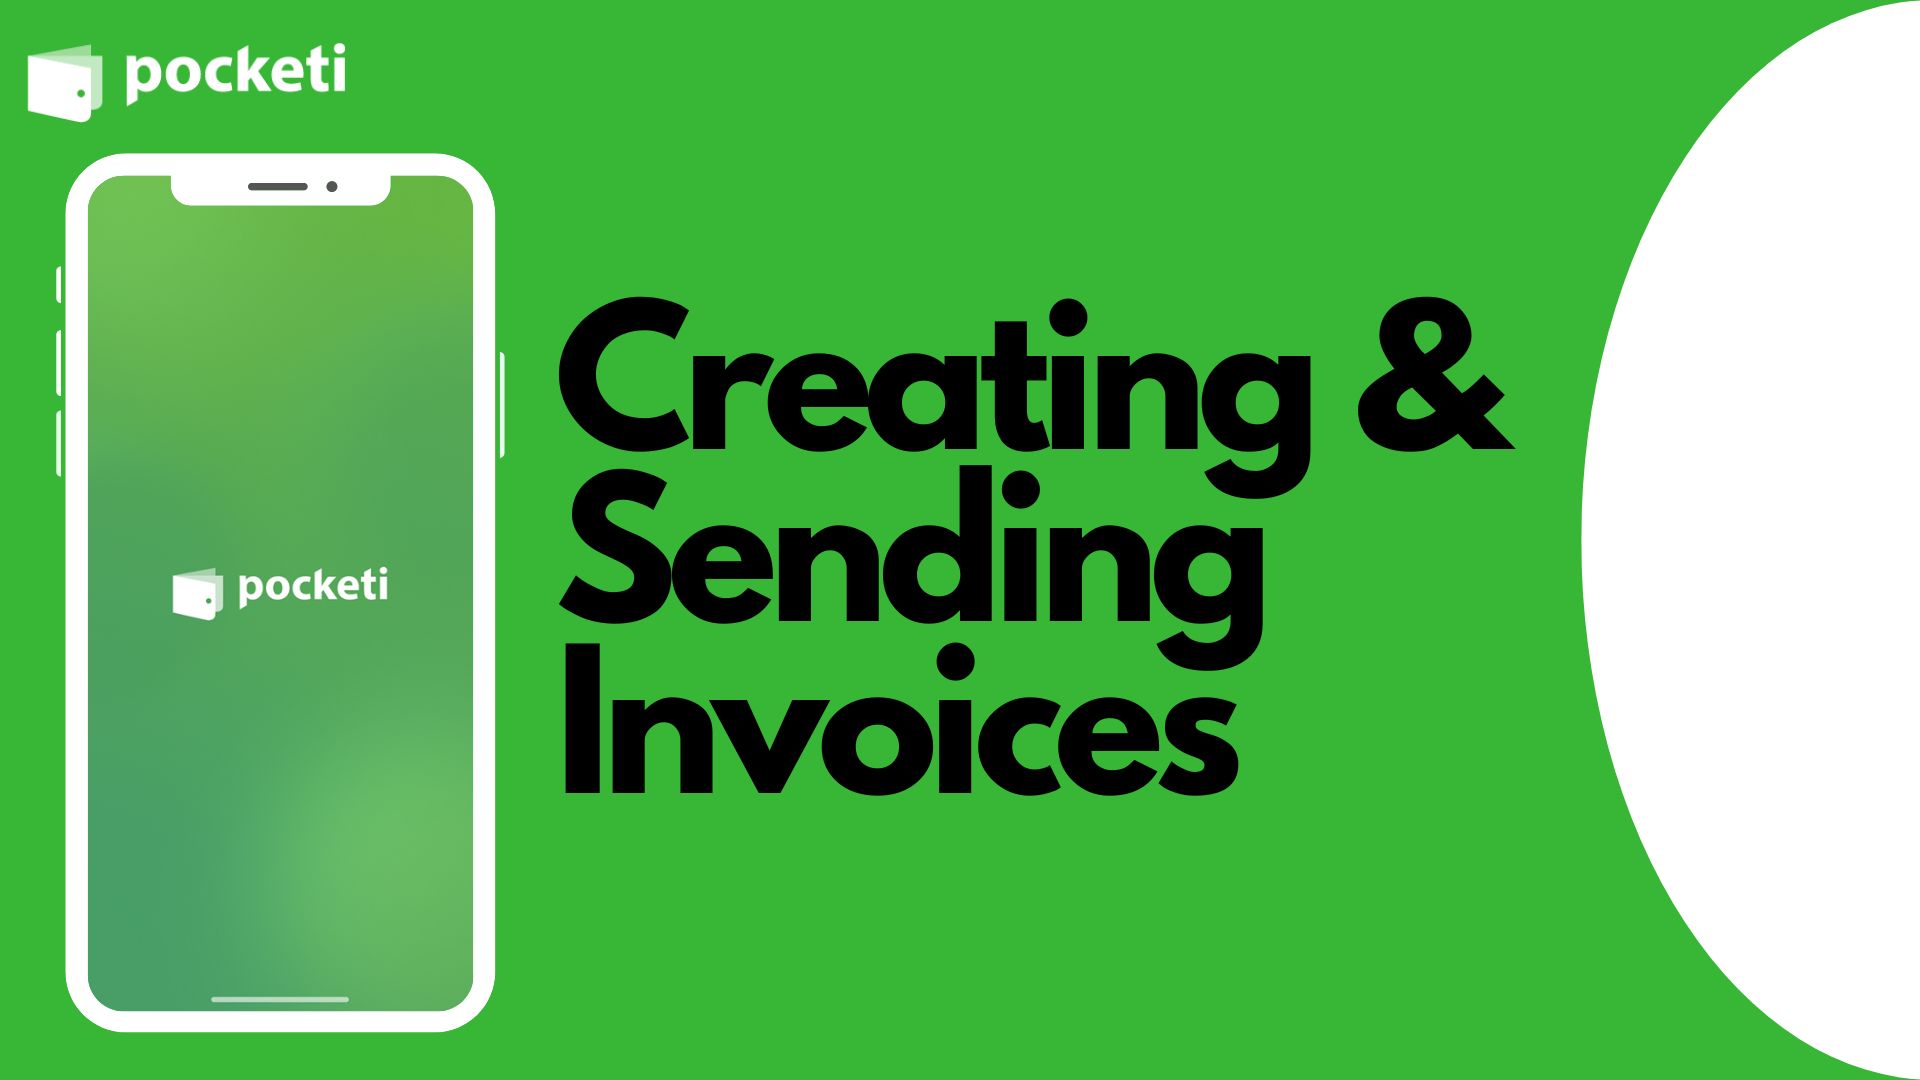 Creating Invoices